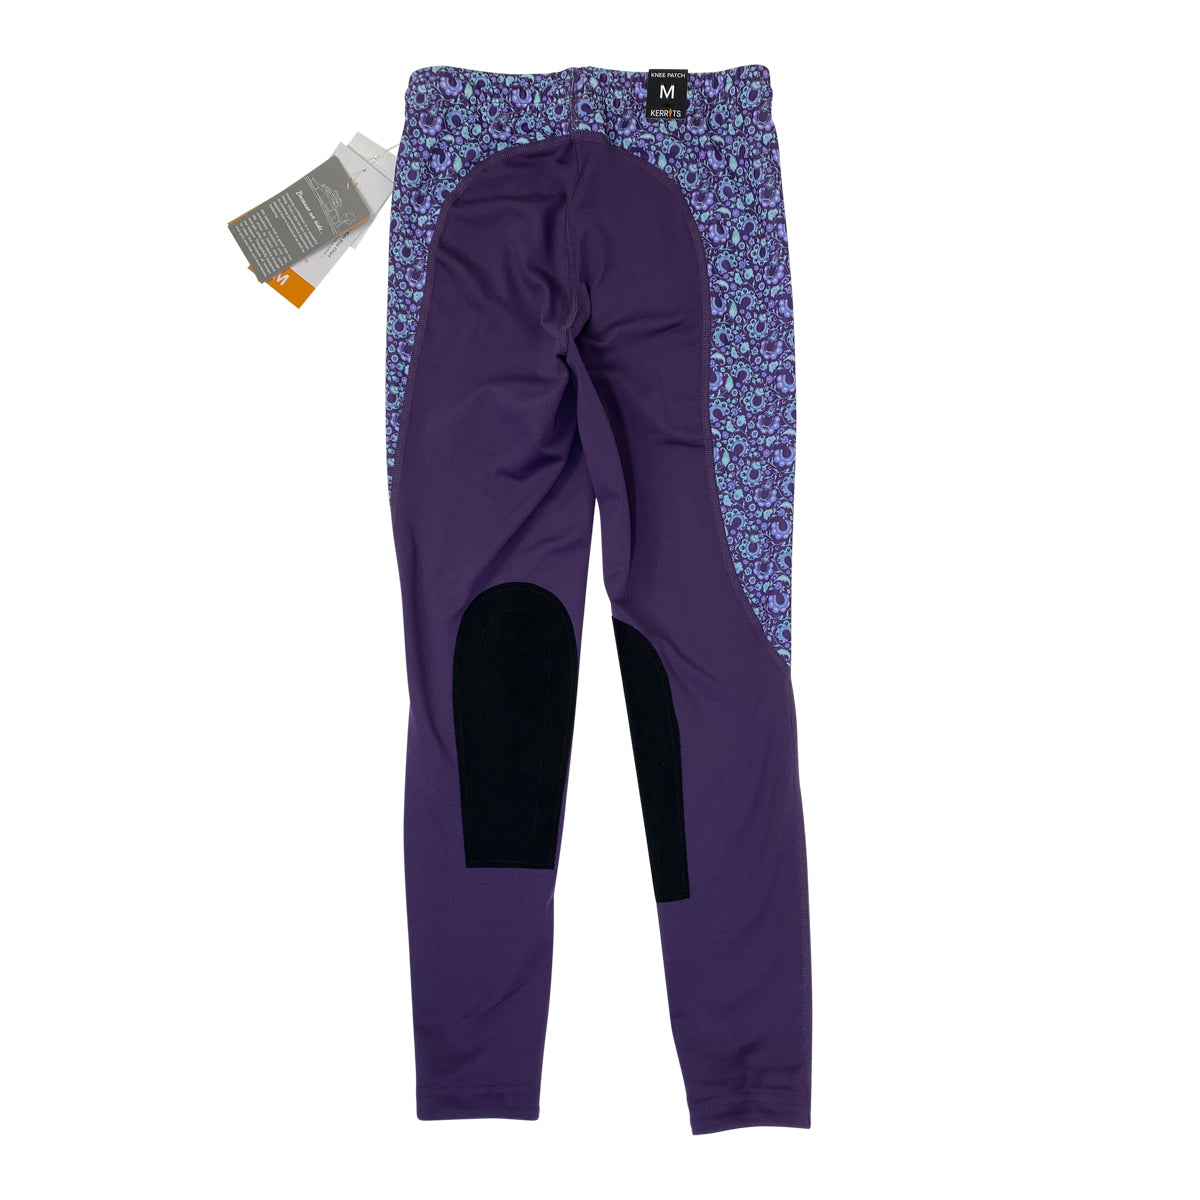 Kerrits Knee Patch Performance Tights in Huckleberry/Iris Make Your Luck